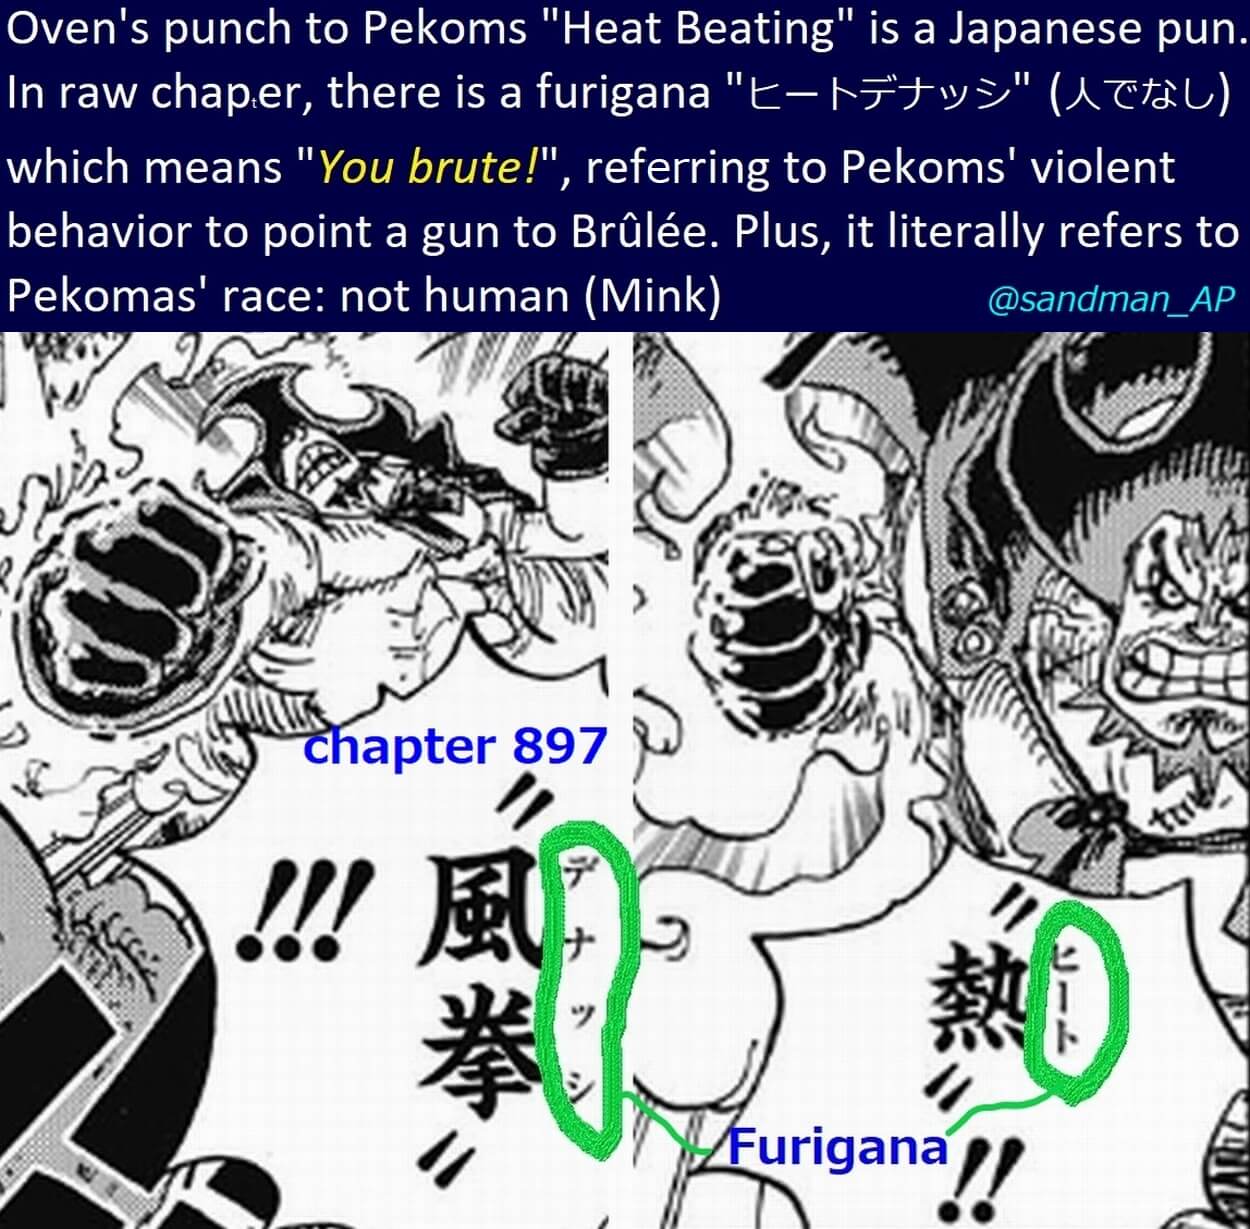 Sandman Here Are Some Trivia About The Latest Chapter Of One Piece 7 About Vinsmokes And Japanese Pun For Oven S Attack T Co I0zmrlfo1e Twitter